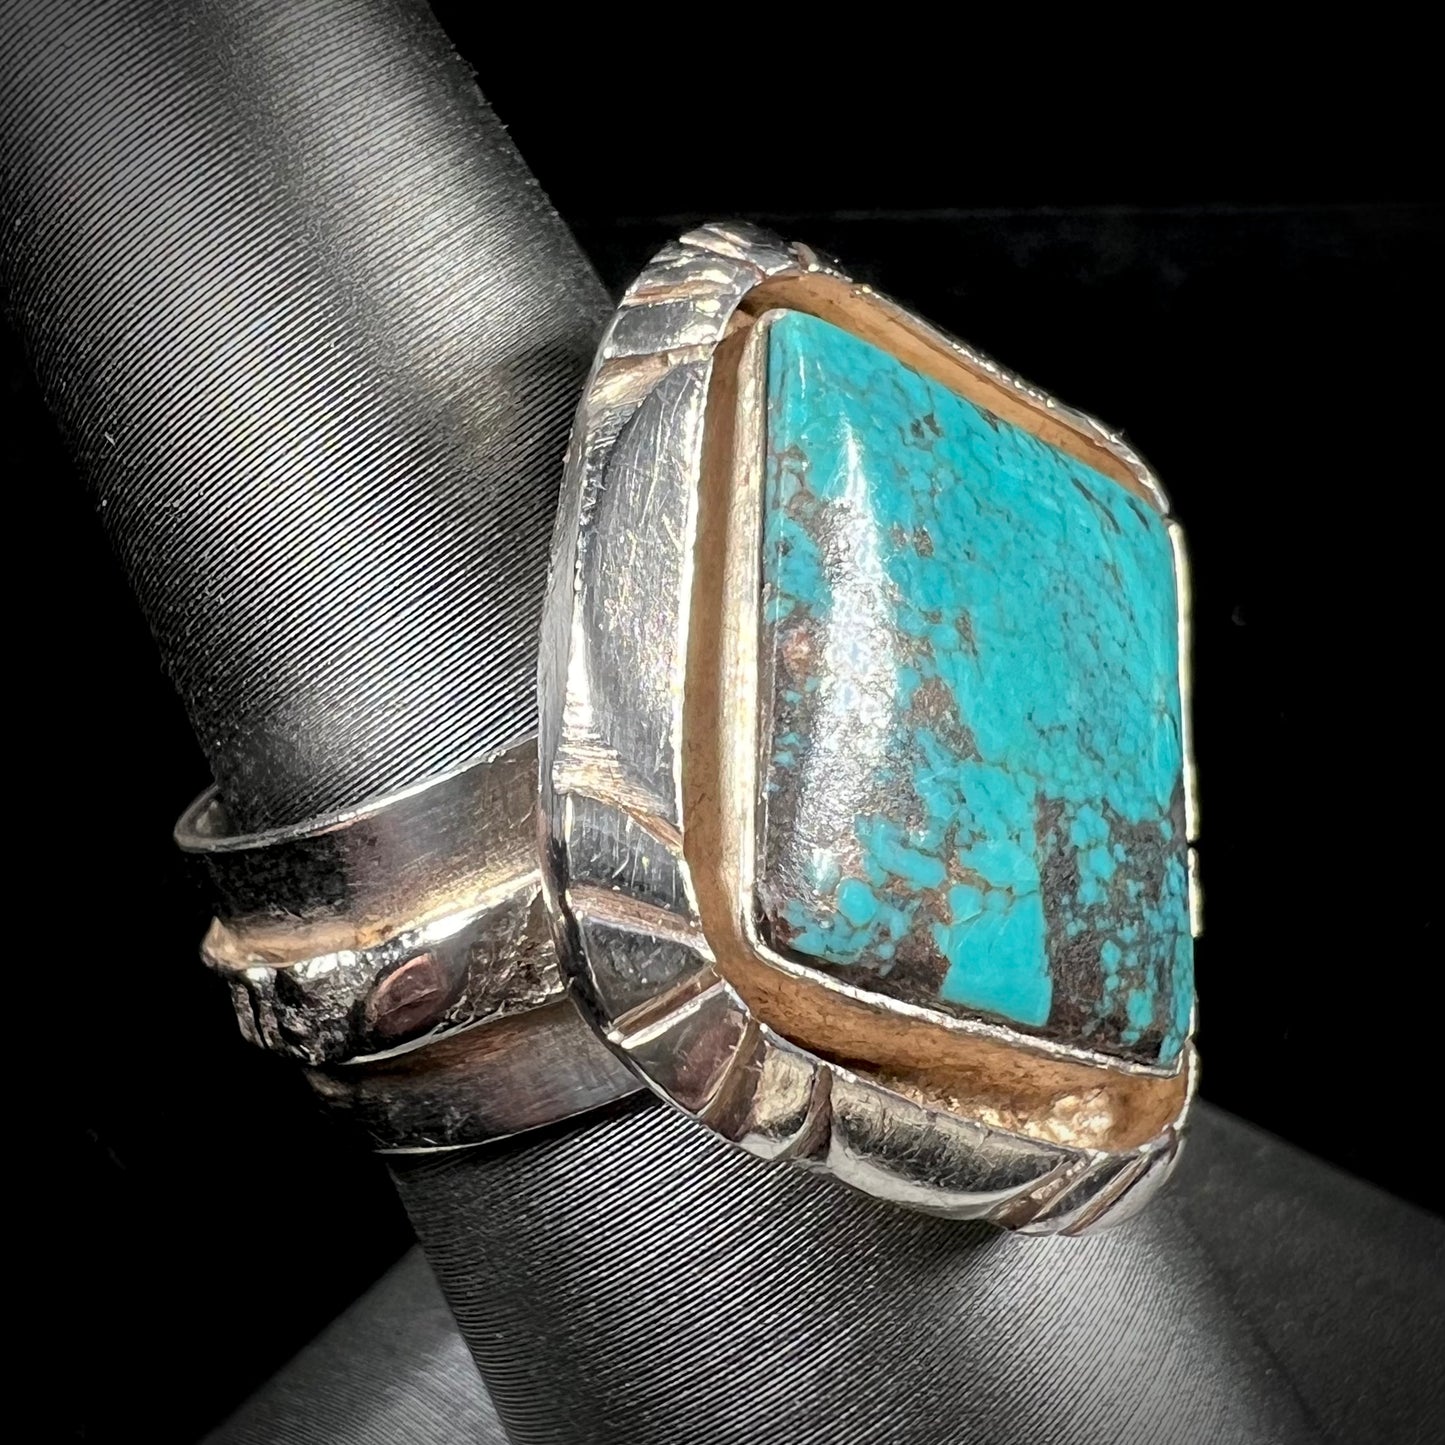 A handmade sterling silver, unisex, likely Navajo ring set with Tibetan turquoise.